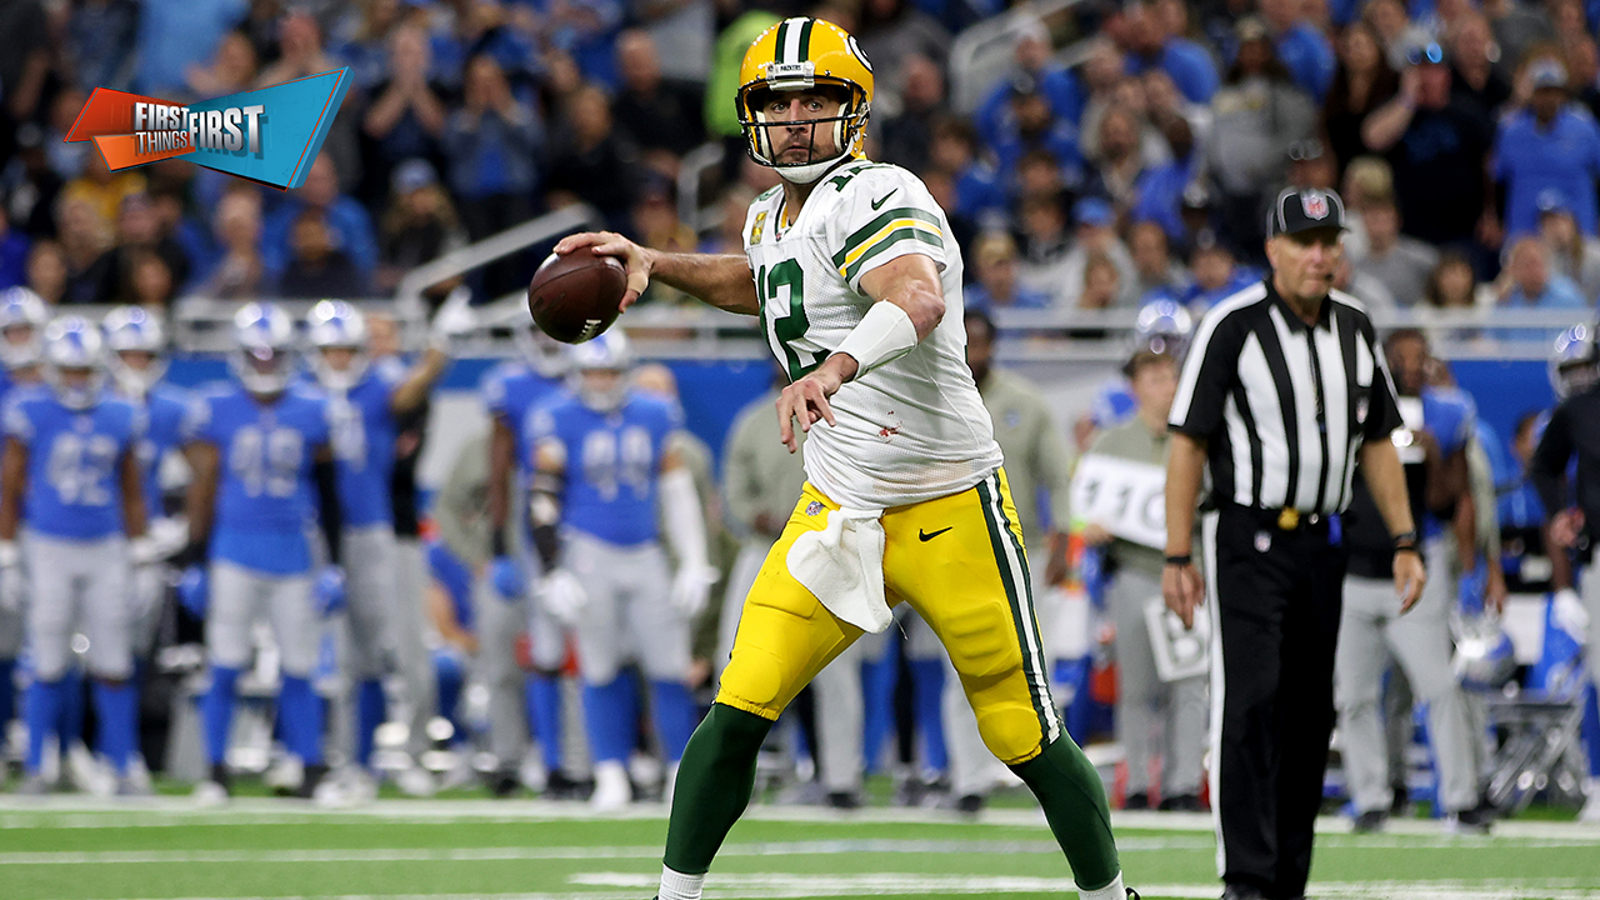 Is it time for the Packers to move on from Aaron Rodgers?